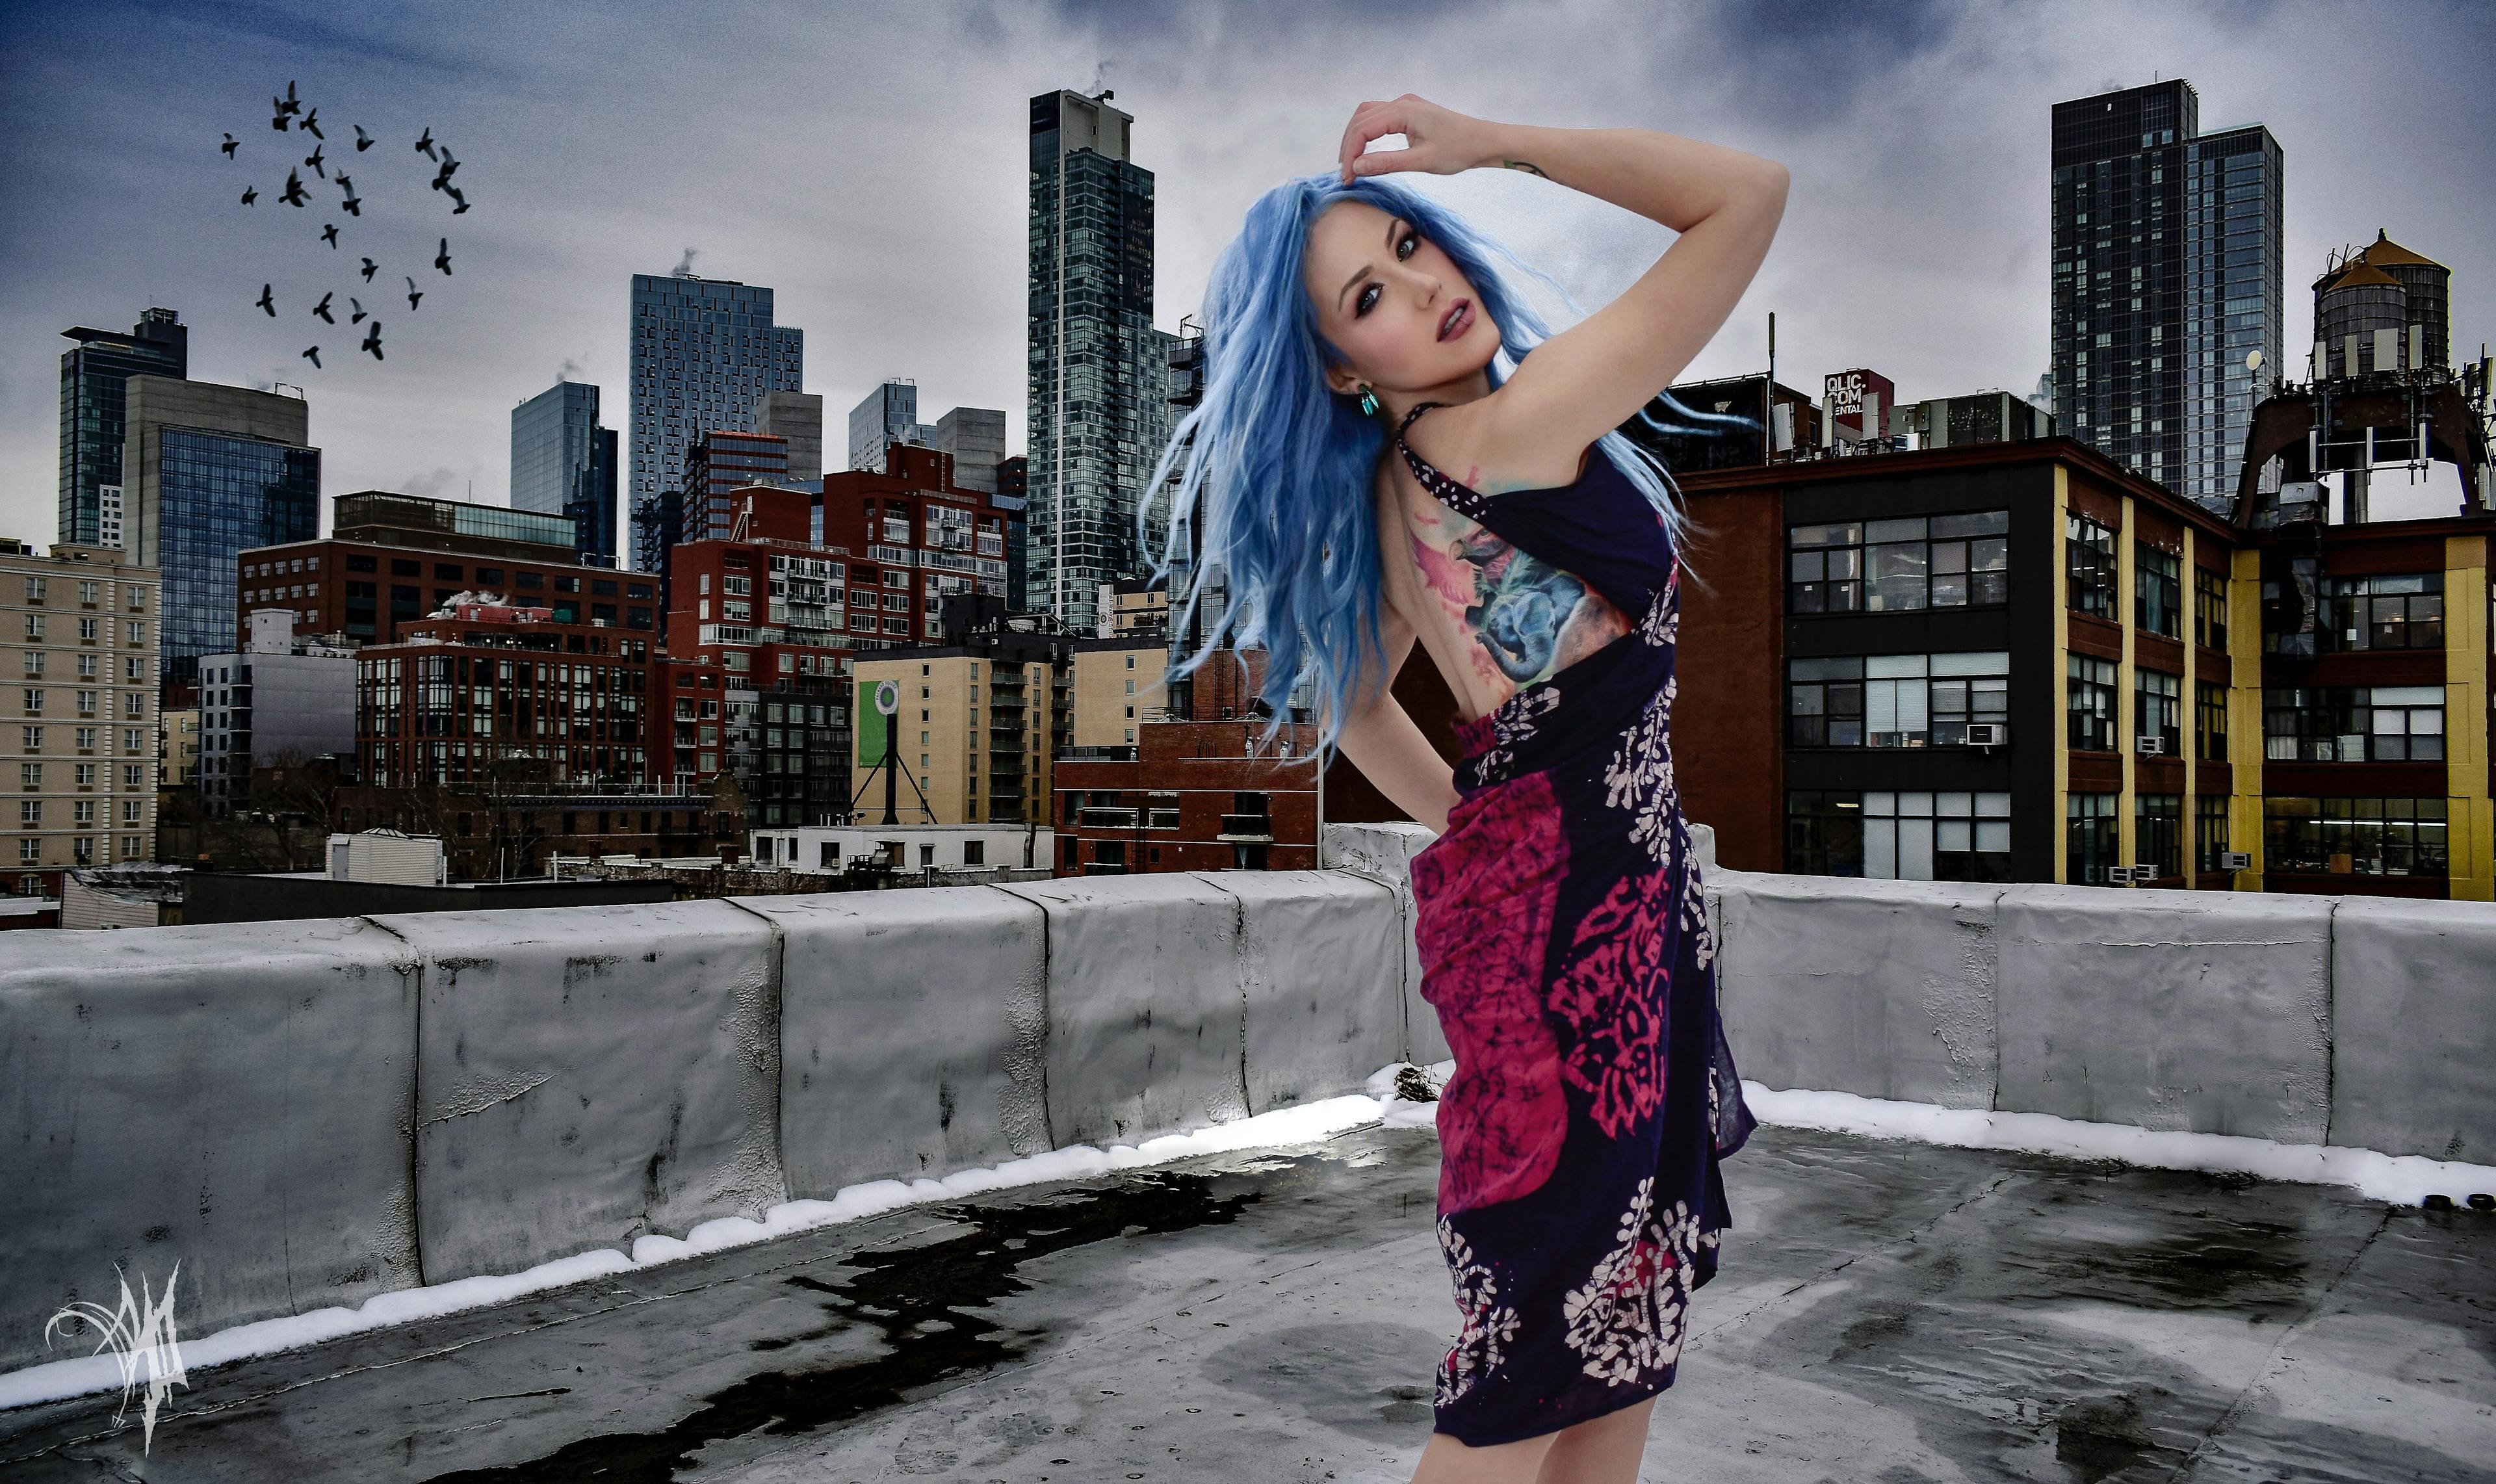 Alissa White-Gluz: "Human trafficking is a global issue and I feel it deserves global attention"